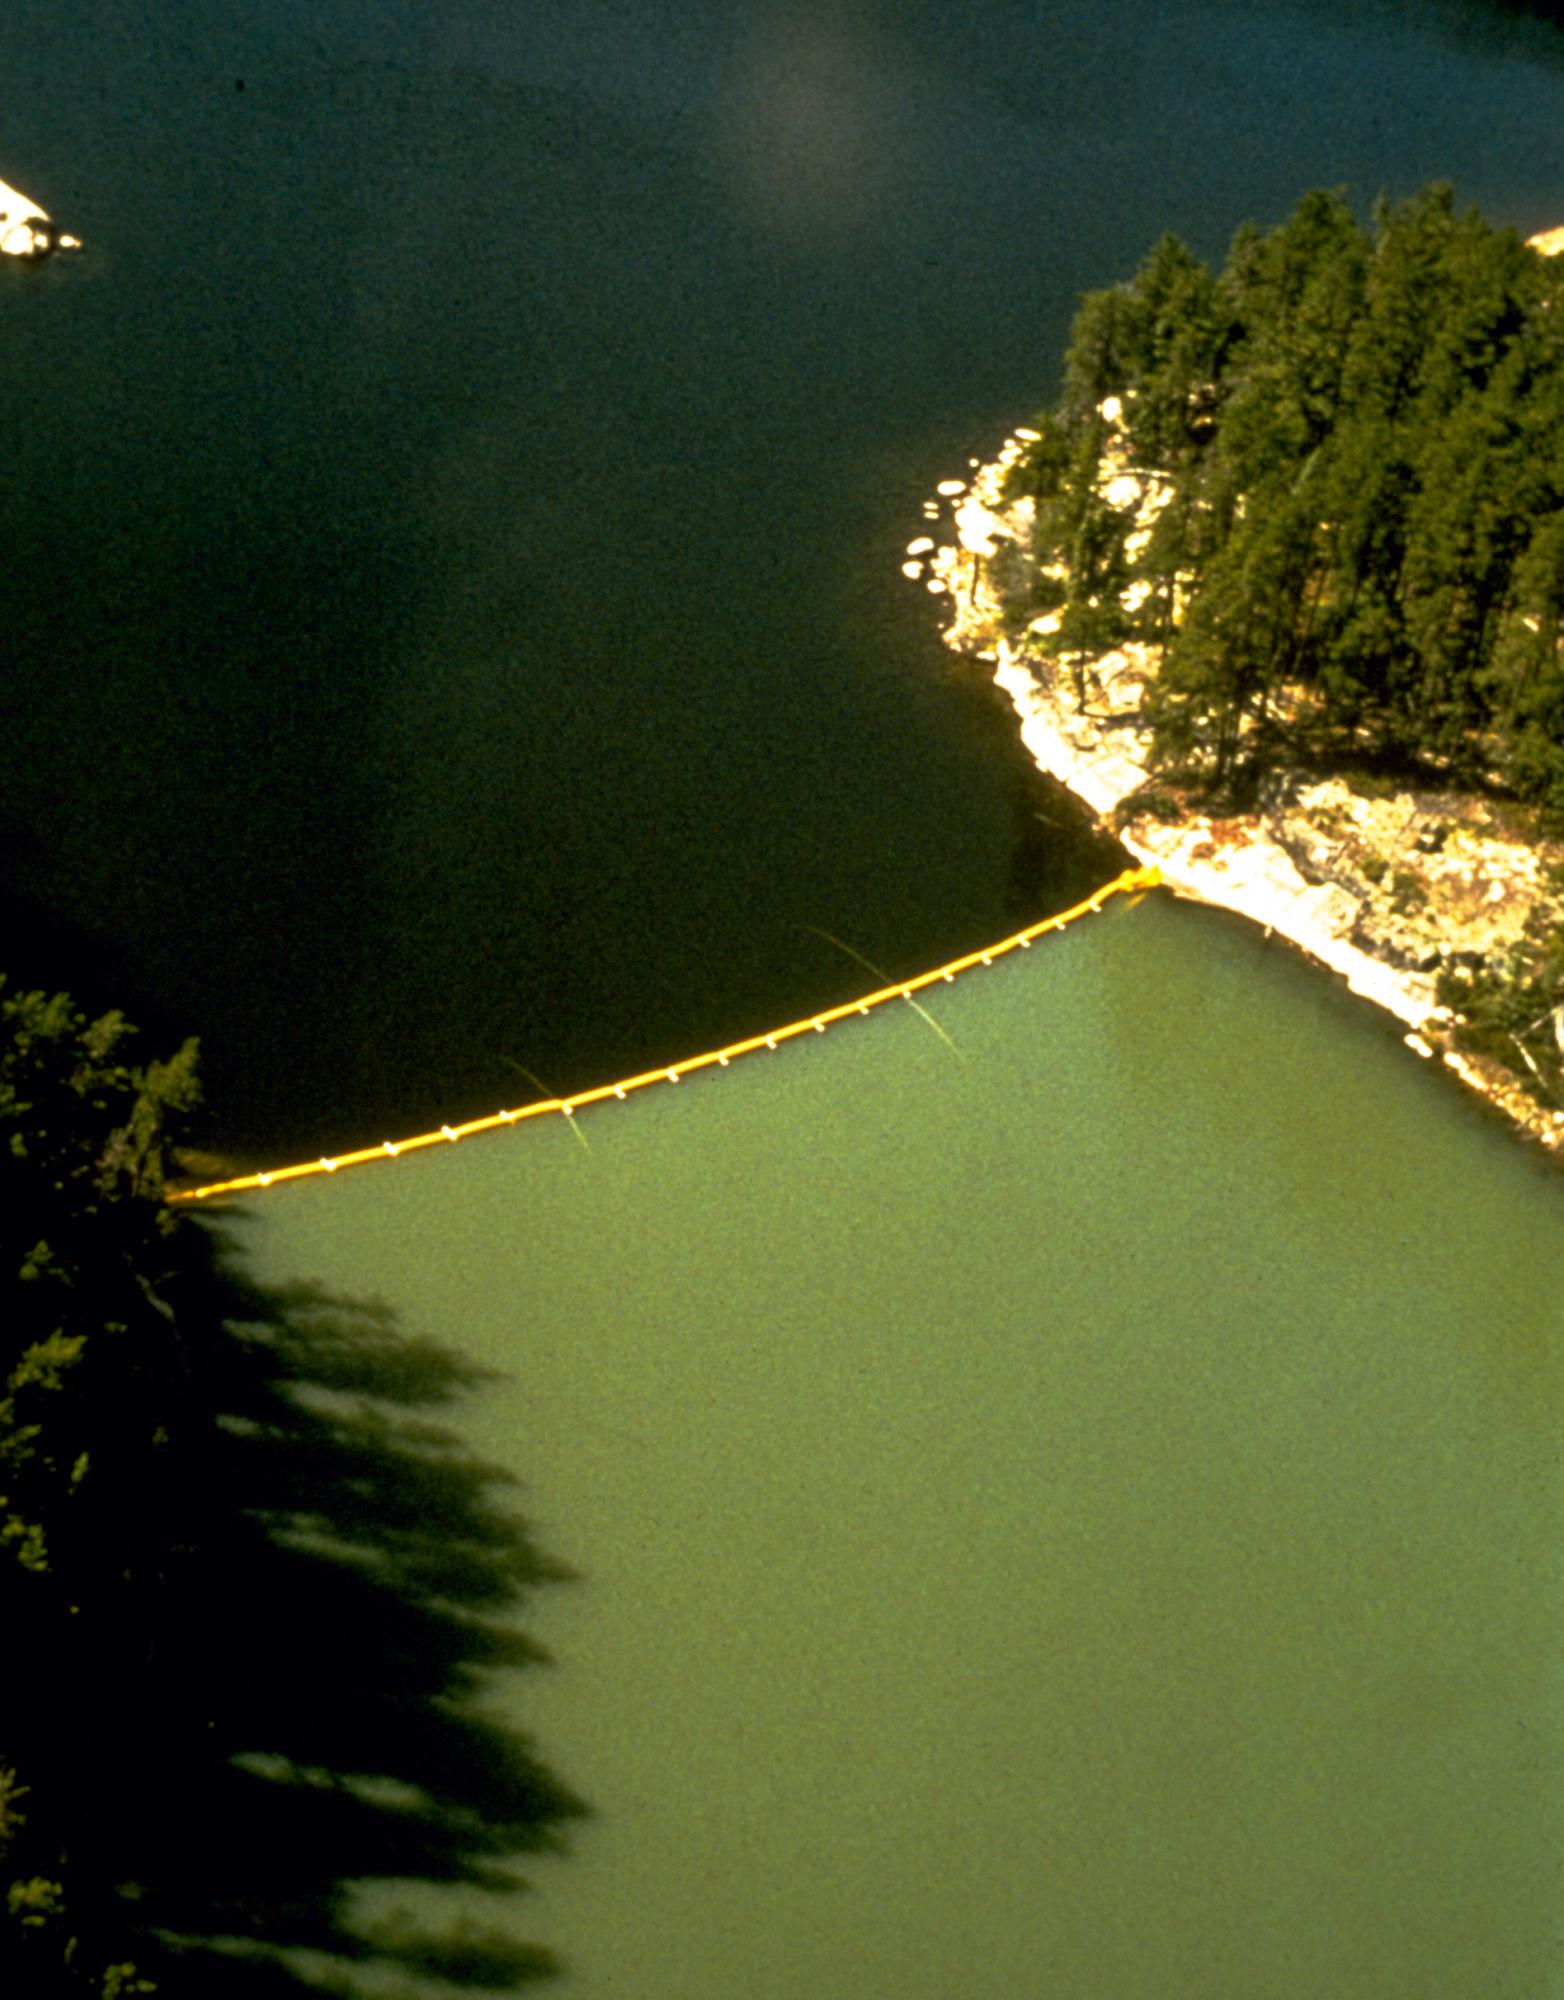 In perhaps the ELA's most famous experiment, Schindler and his colleagues deliberately contaminated Lake 226 in order to prove that phosphorus was the driving force behind uncontrolled algae blooms (eutrophication) that were devastating lakes all across North America, especially Lake Erie. The area above the boom was fertilized with carbon and nitrogen, while the area below was fertilized with carbon, nitrogen, and phosphorus. This photo has been called "the single most powerful image in the history of limnology" and led to the banning of phosphorus from household detergents.